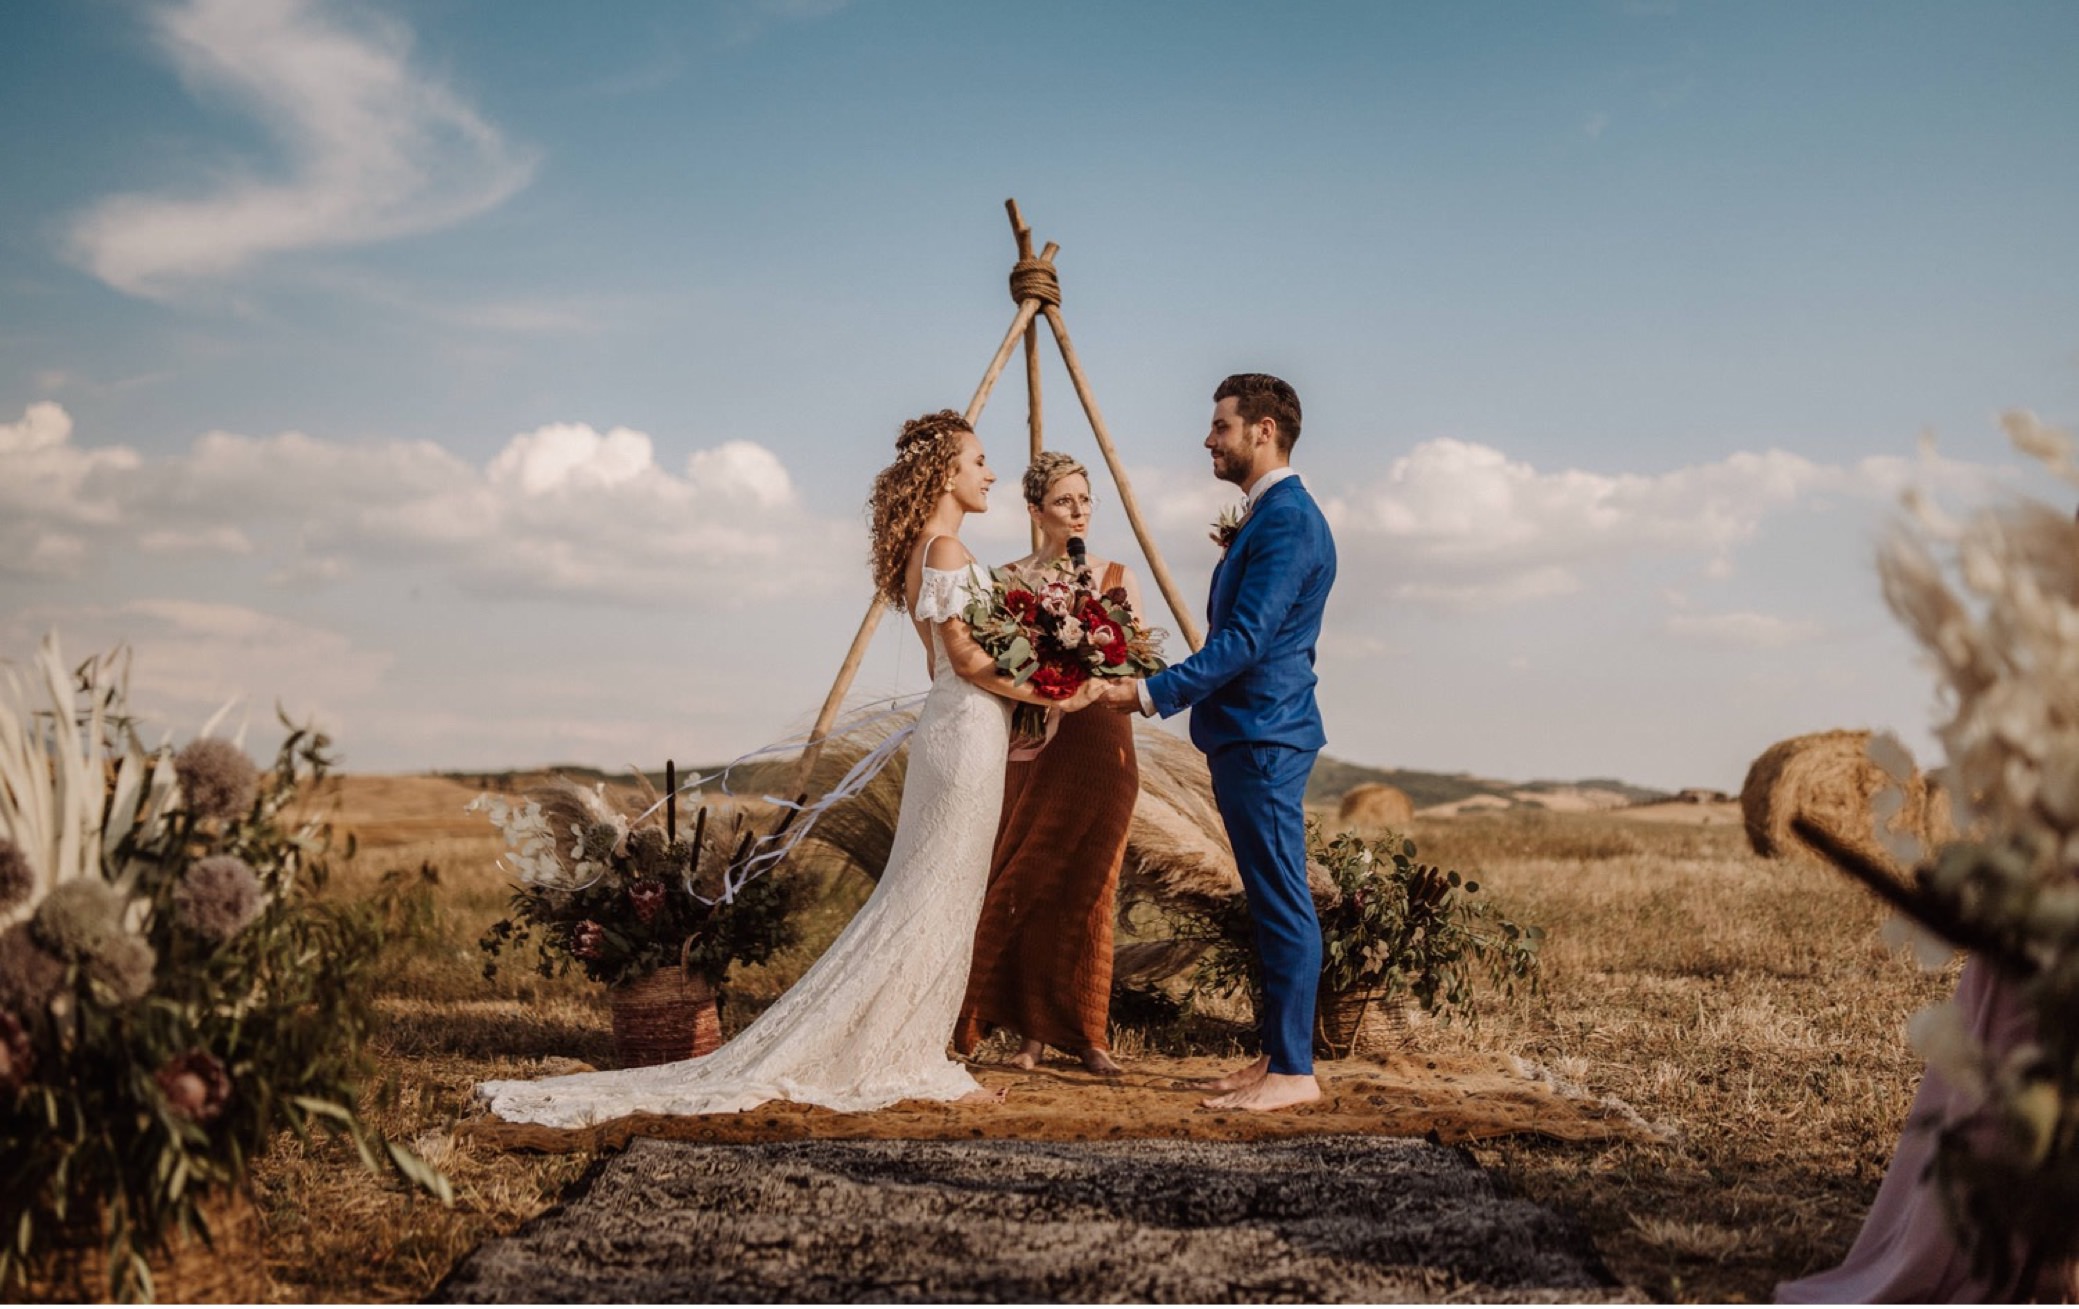 Romantic wedding in the Tuscan countryside